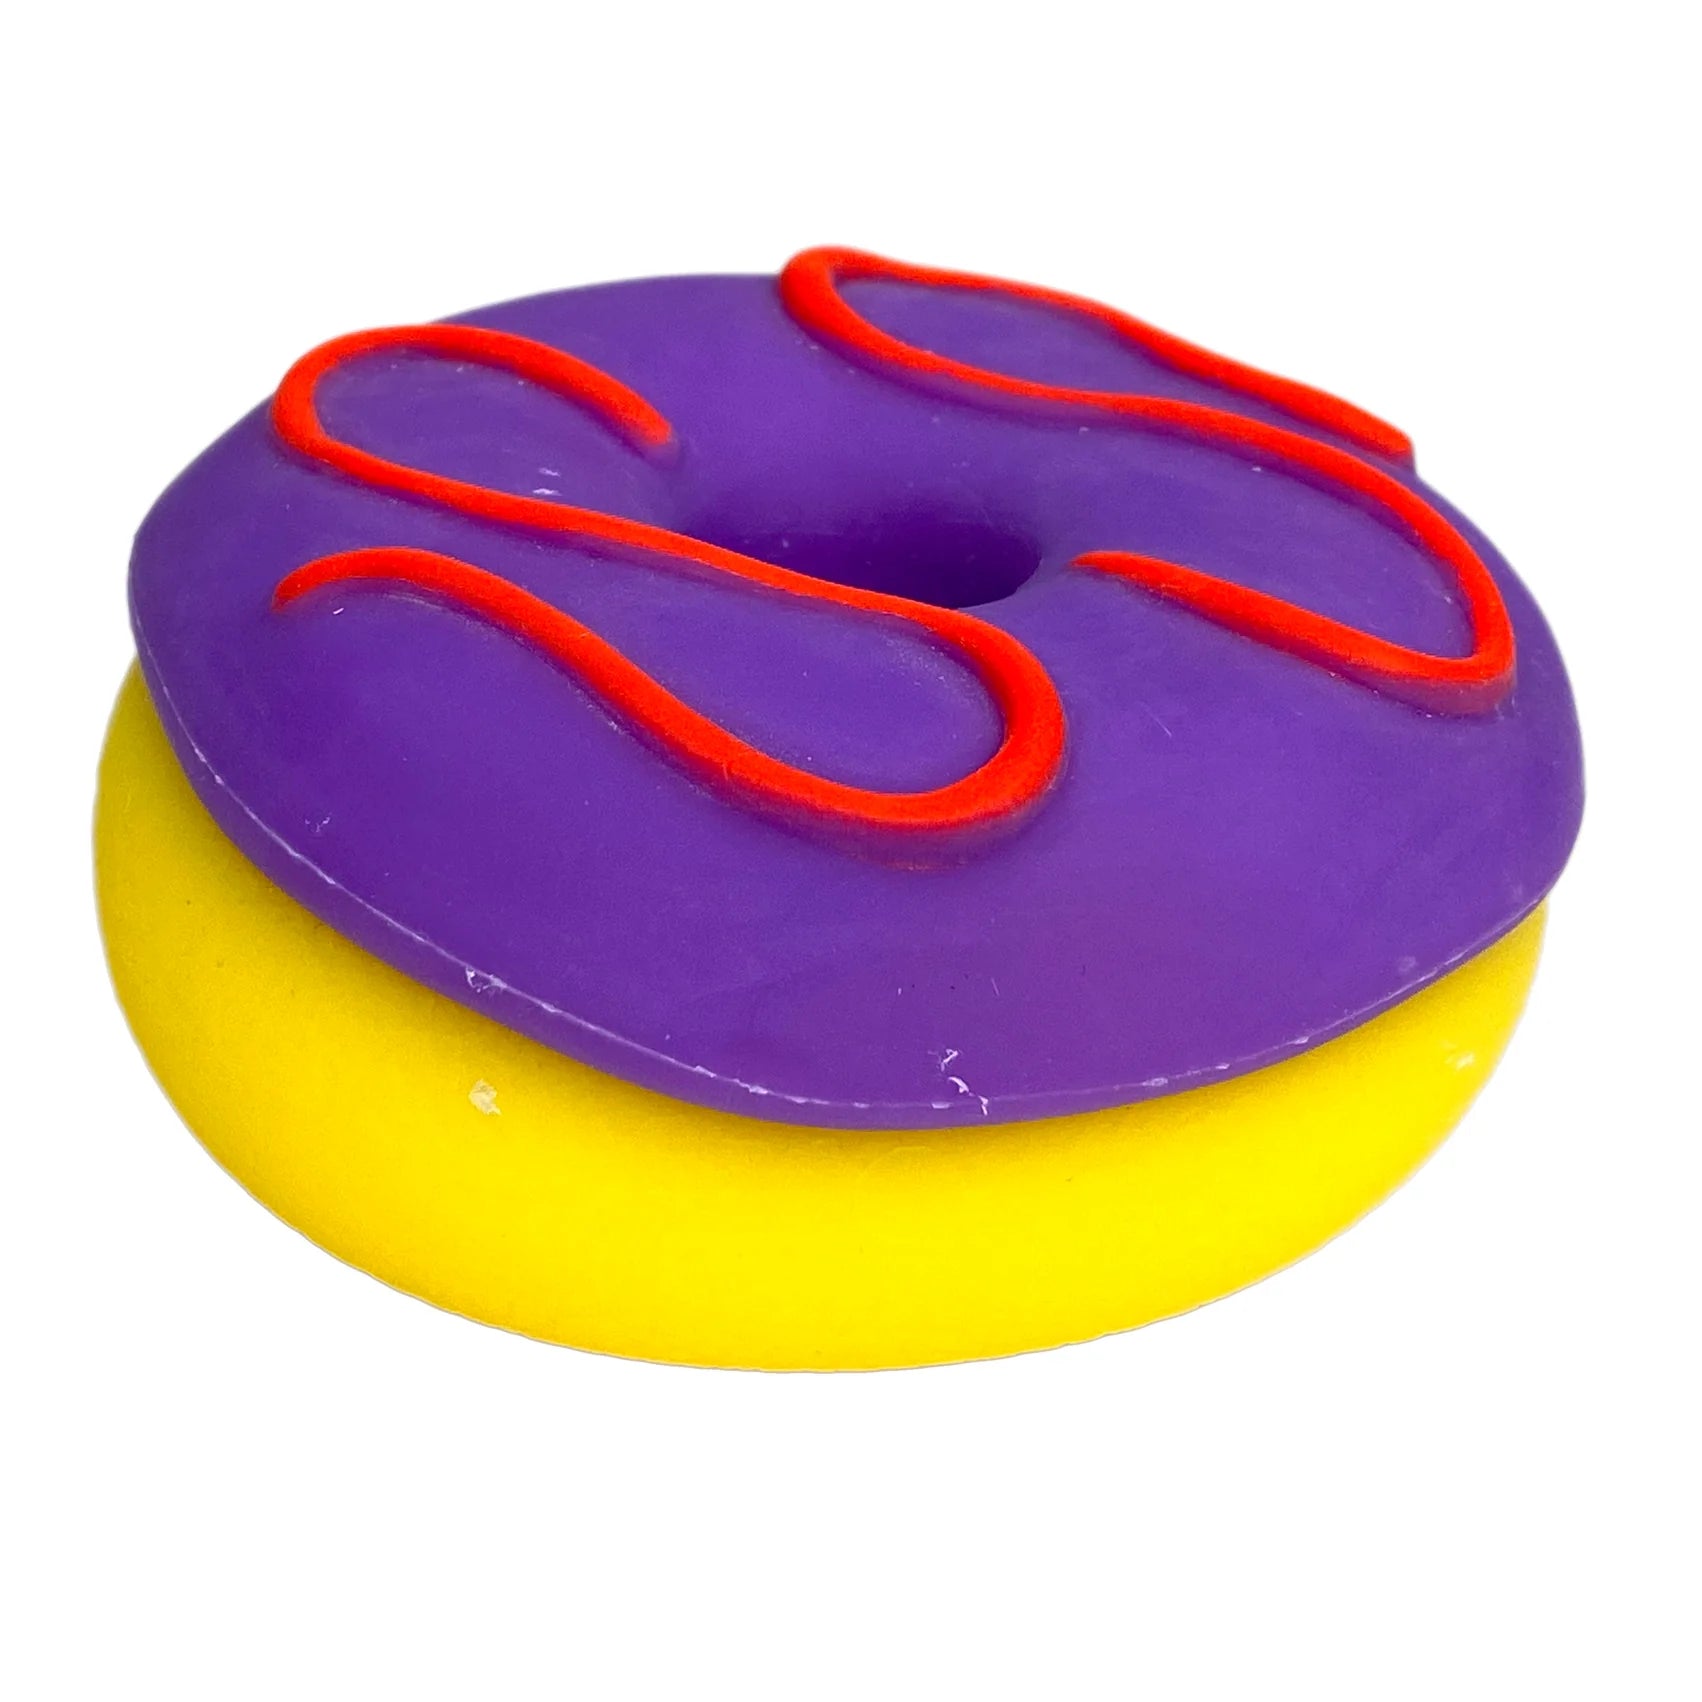 Schylling NeeDoh Dohnuts - Yellow with Purple Frosting and Swirls